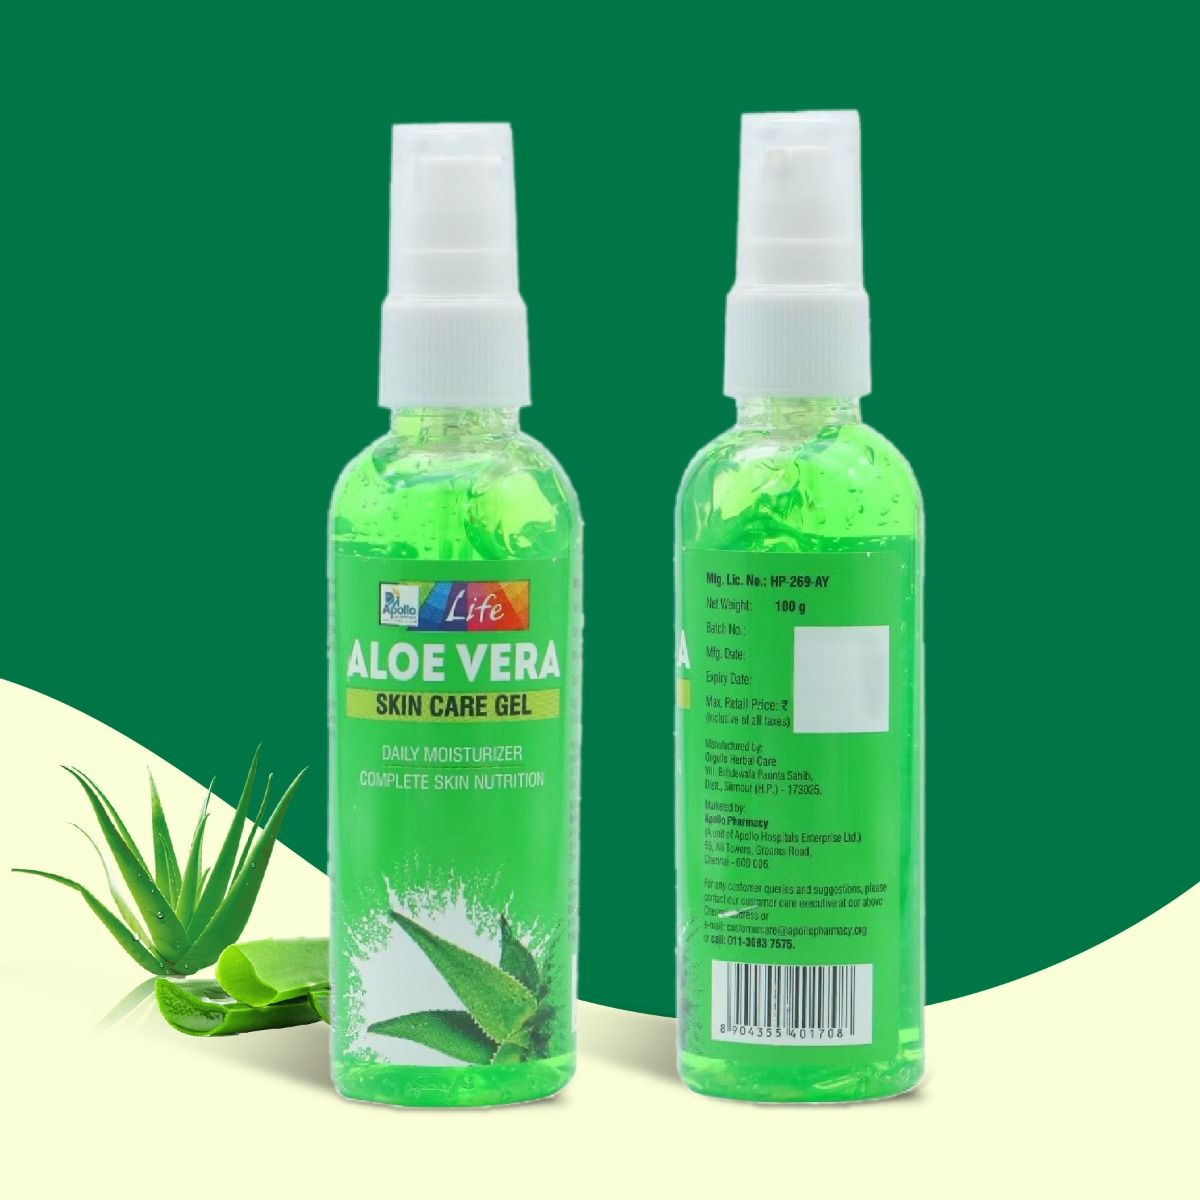 Apollo Life Aloe Vera Skin Care Gel 300 Gm 3x100 Gm Price Uses Side Effects Composition 6508